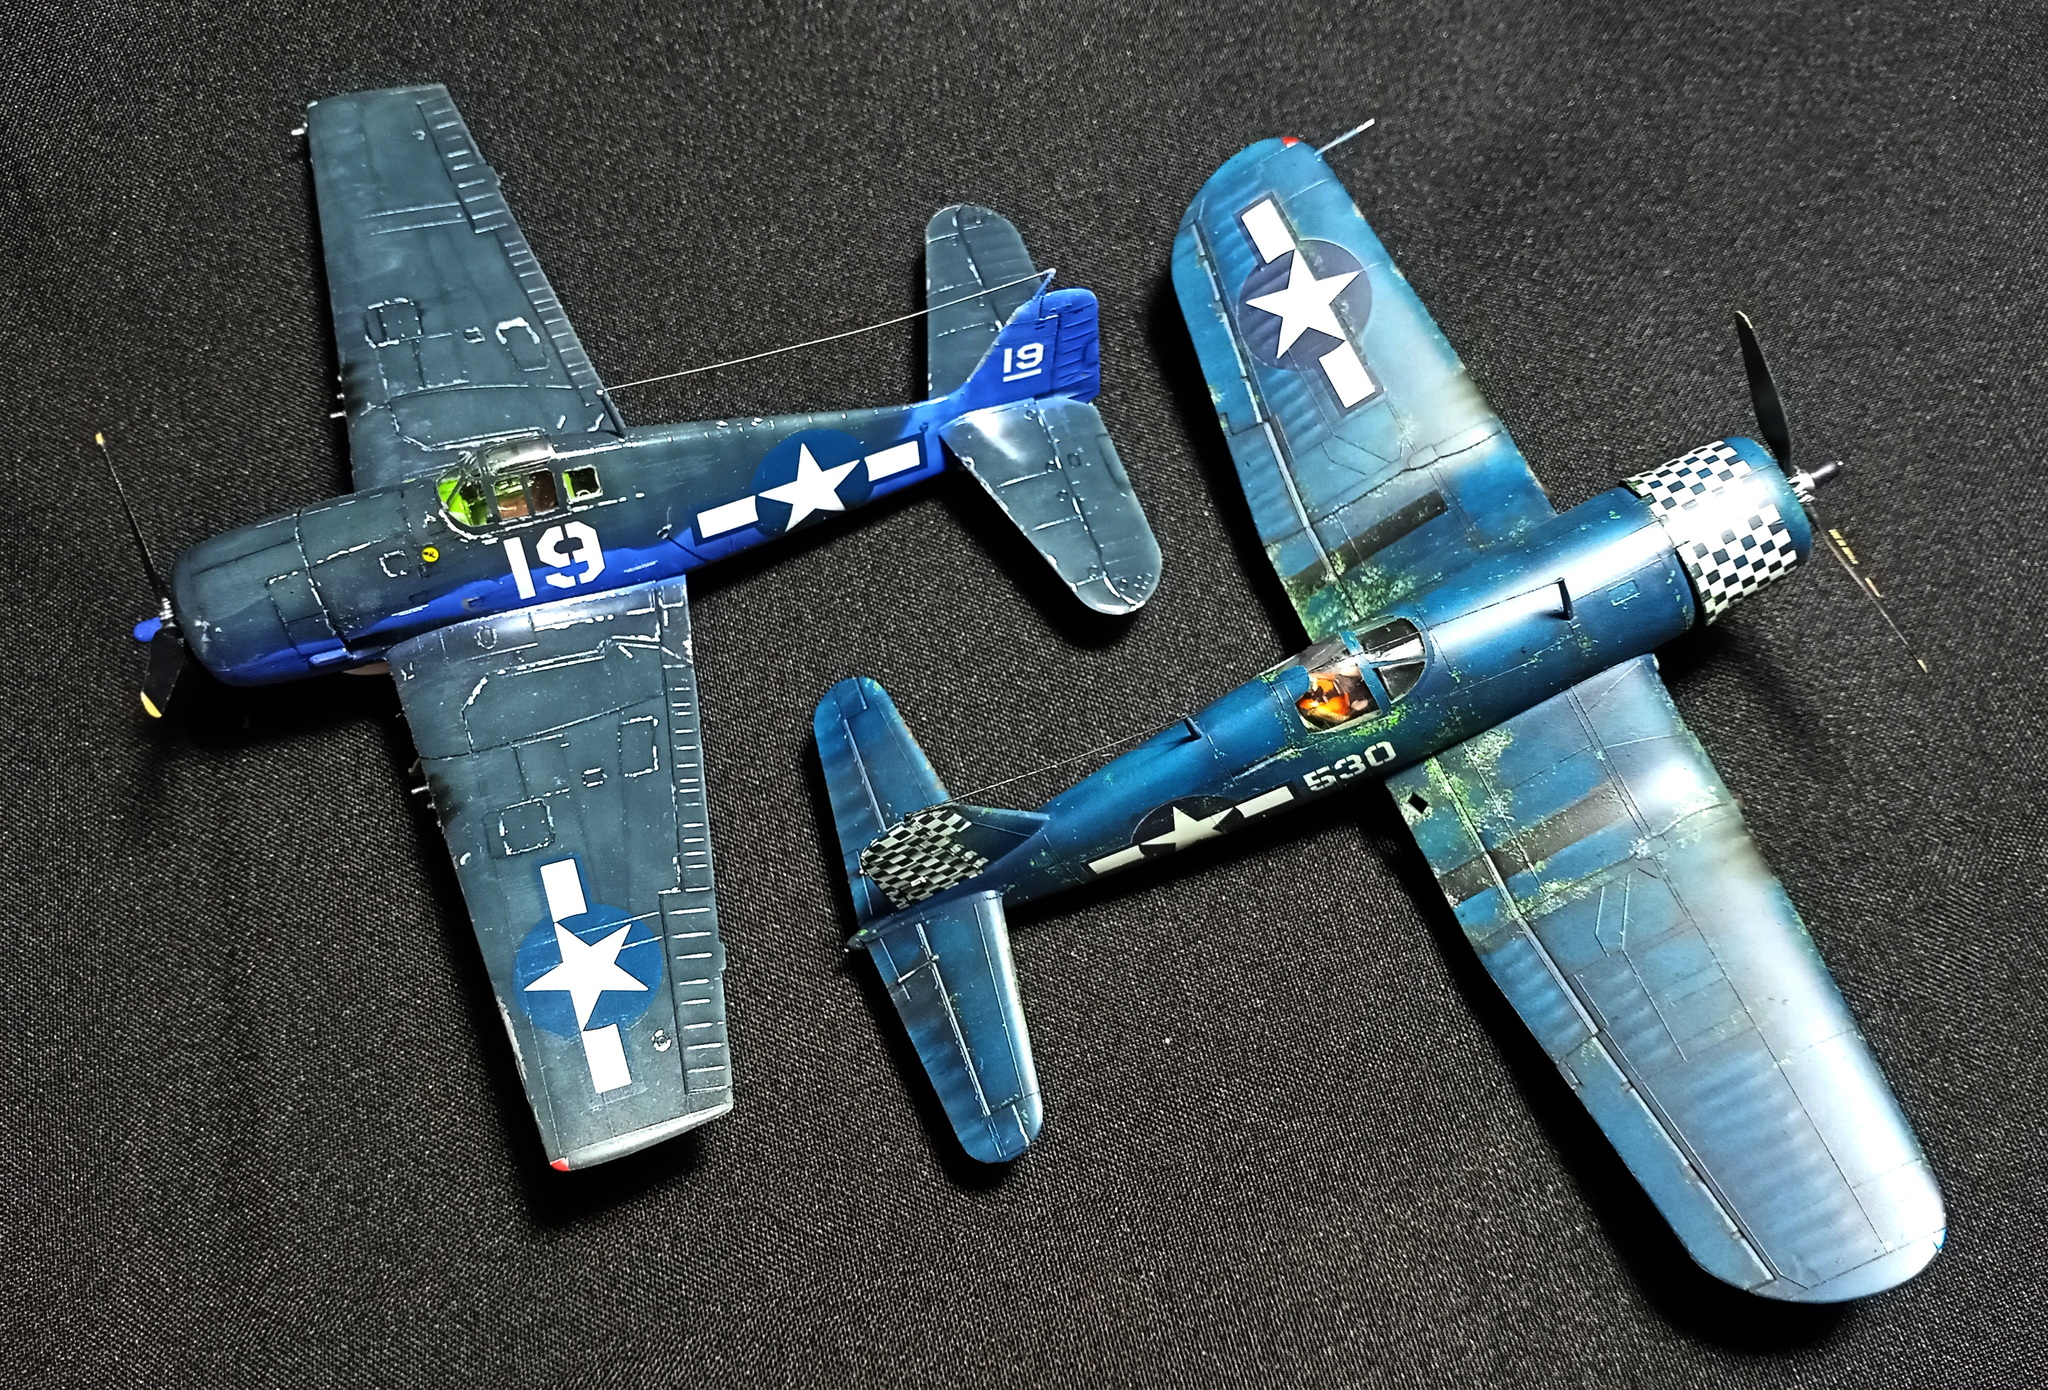 Pirate of the air ocean. - Longpost, Video, Carrier-based aviation, Fighter, USA, Collecting, Collection, Scale model, The Second World War, Airplane, Story, Aviation, Needlework without process, With your own hands, Miniature, Hobby, Aircraft modeling, Prefabricated model, Stand modeling, Modeling, My